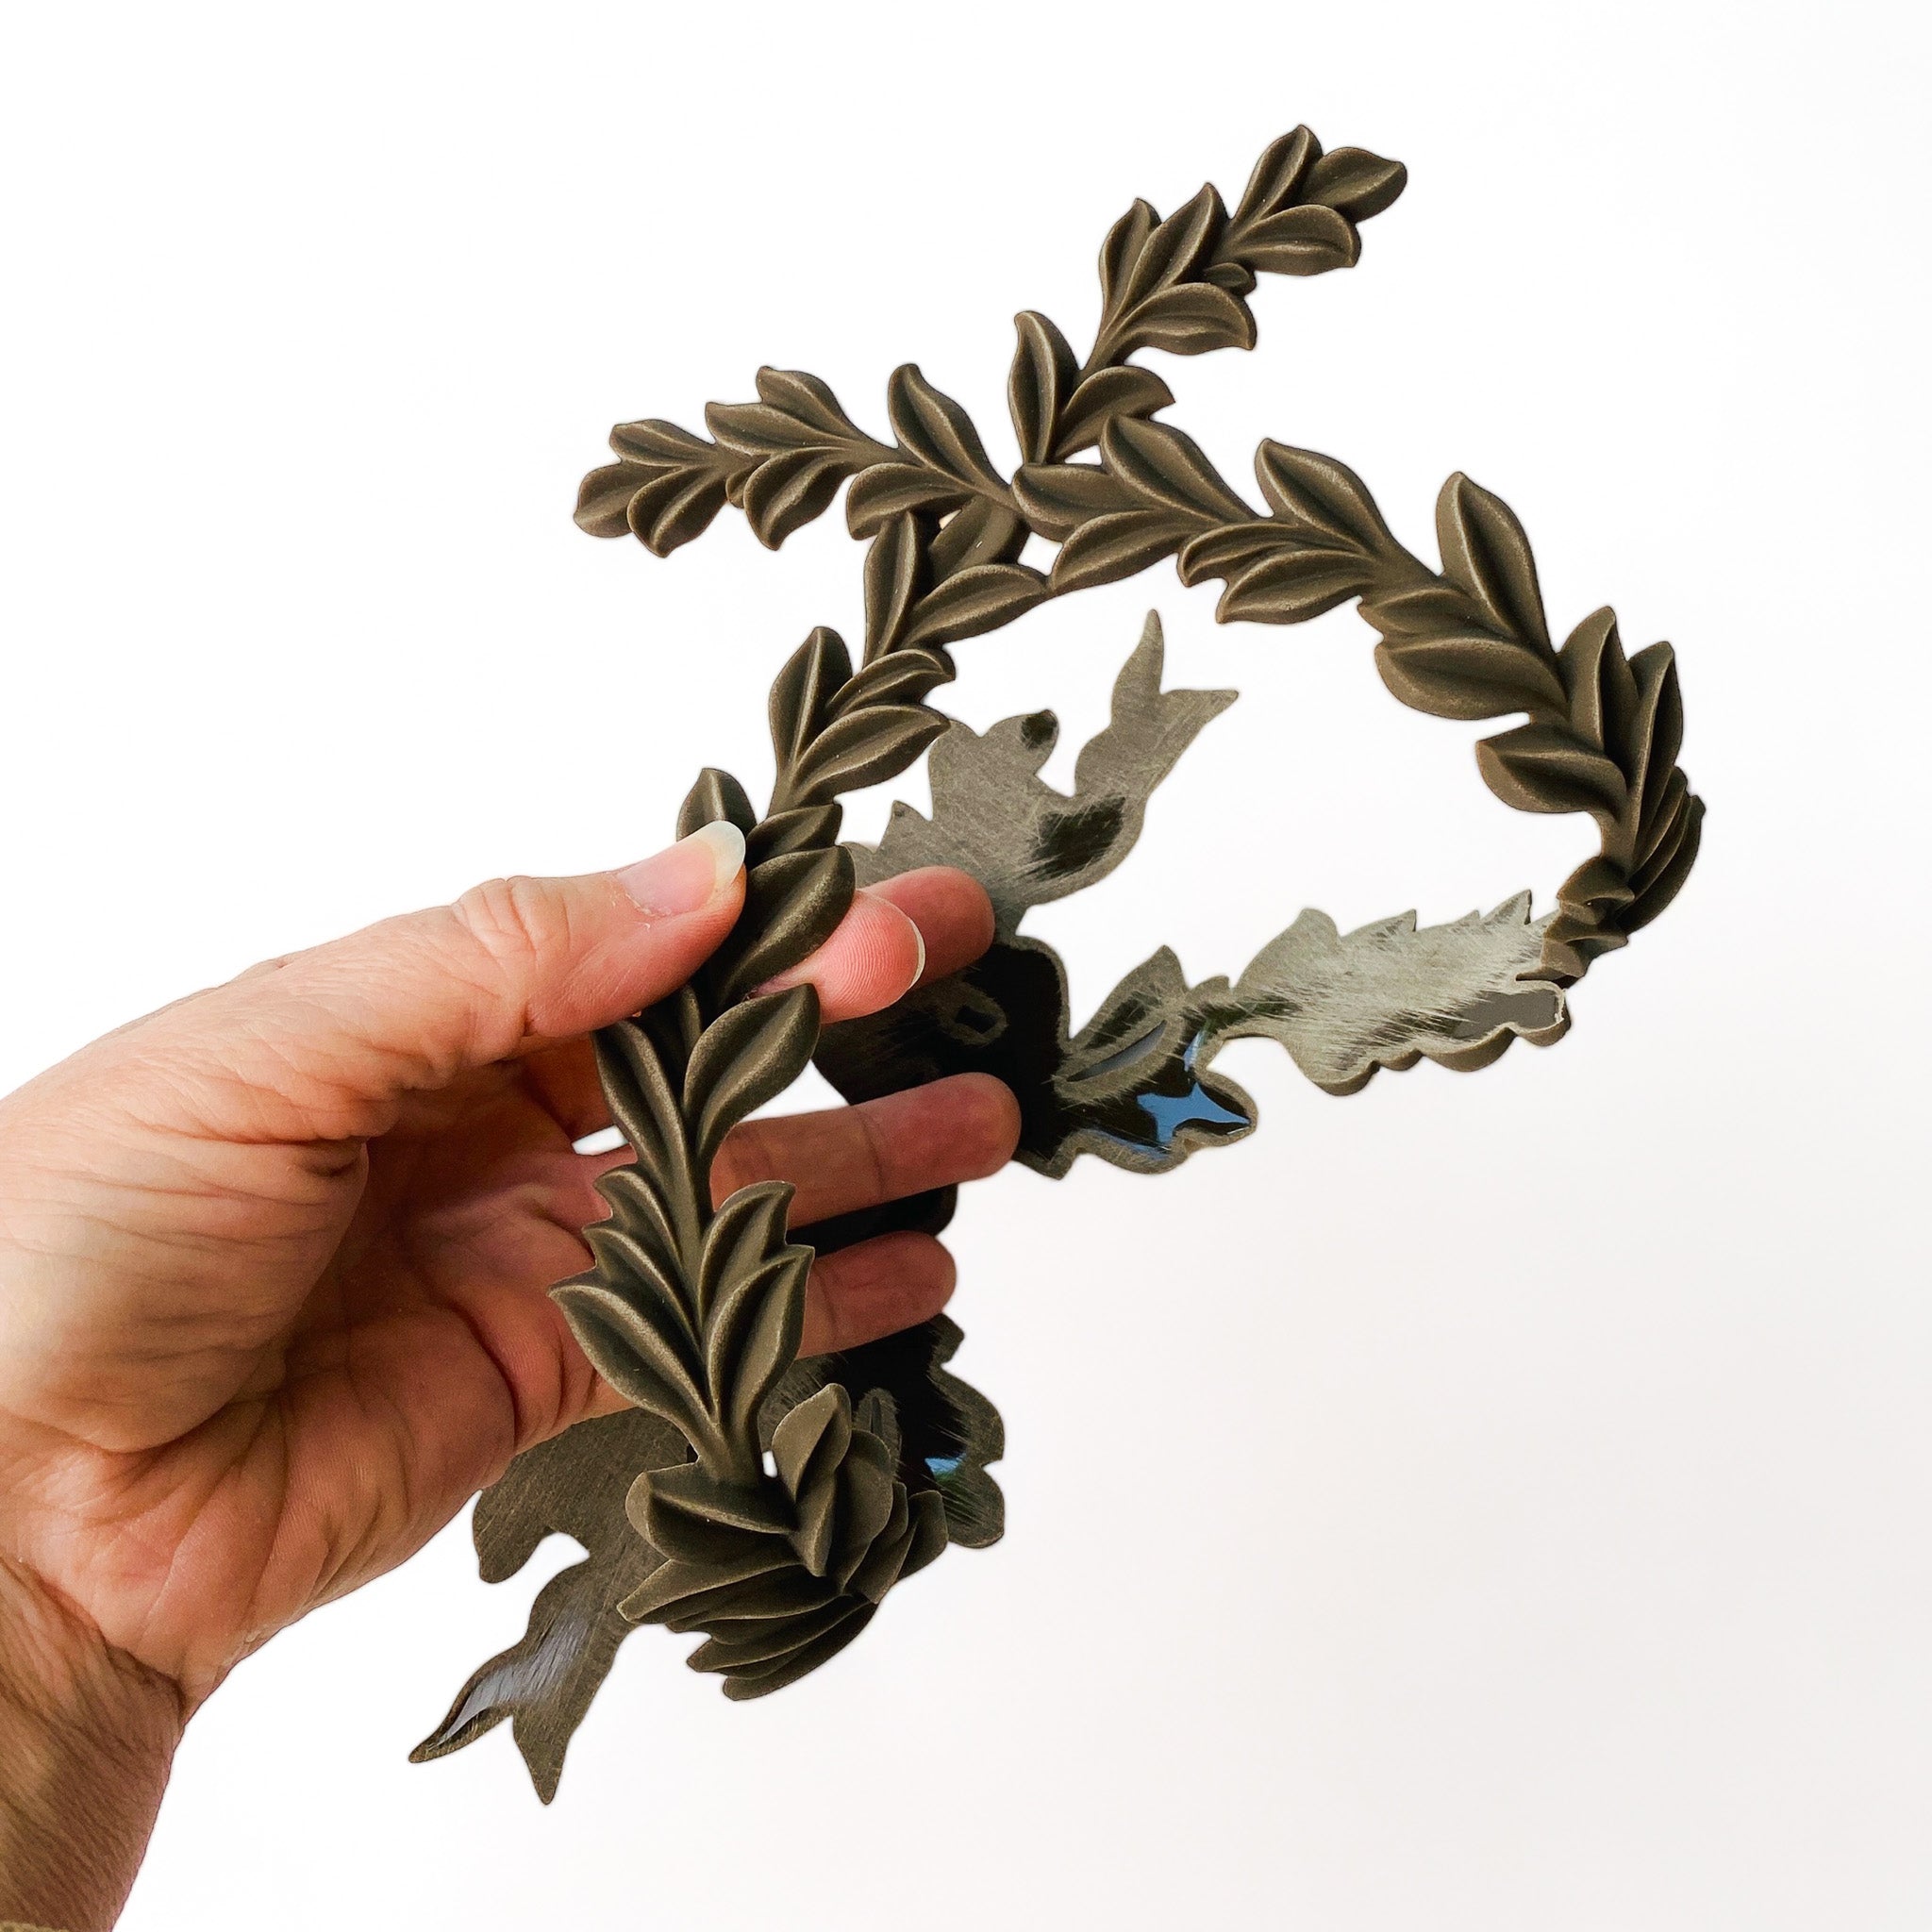 A hand is shown holding a curved bendable furniture applique of leafy sprigs intertwining in an oval frame with the appearance of a ribbon tie against a white background.